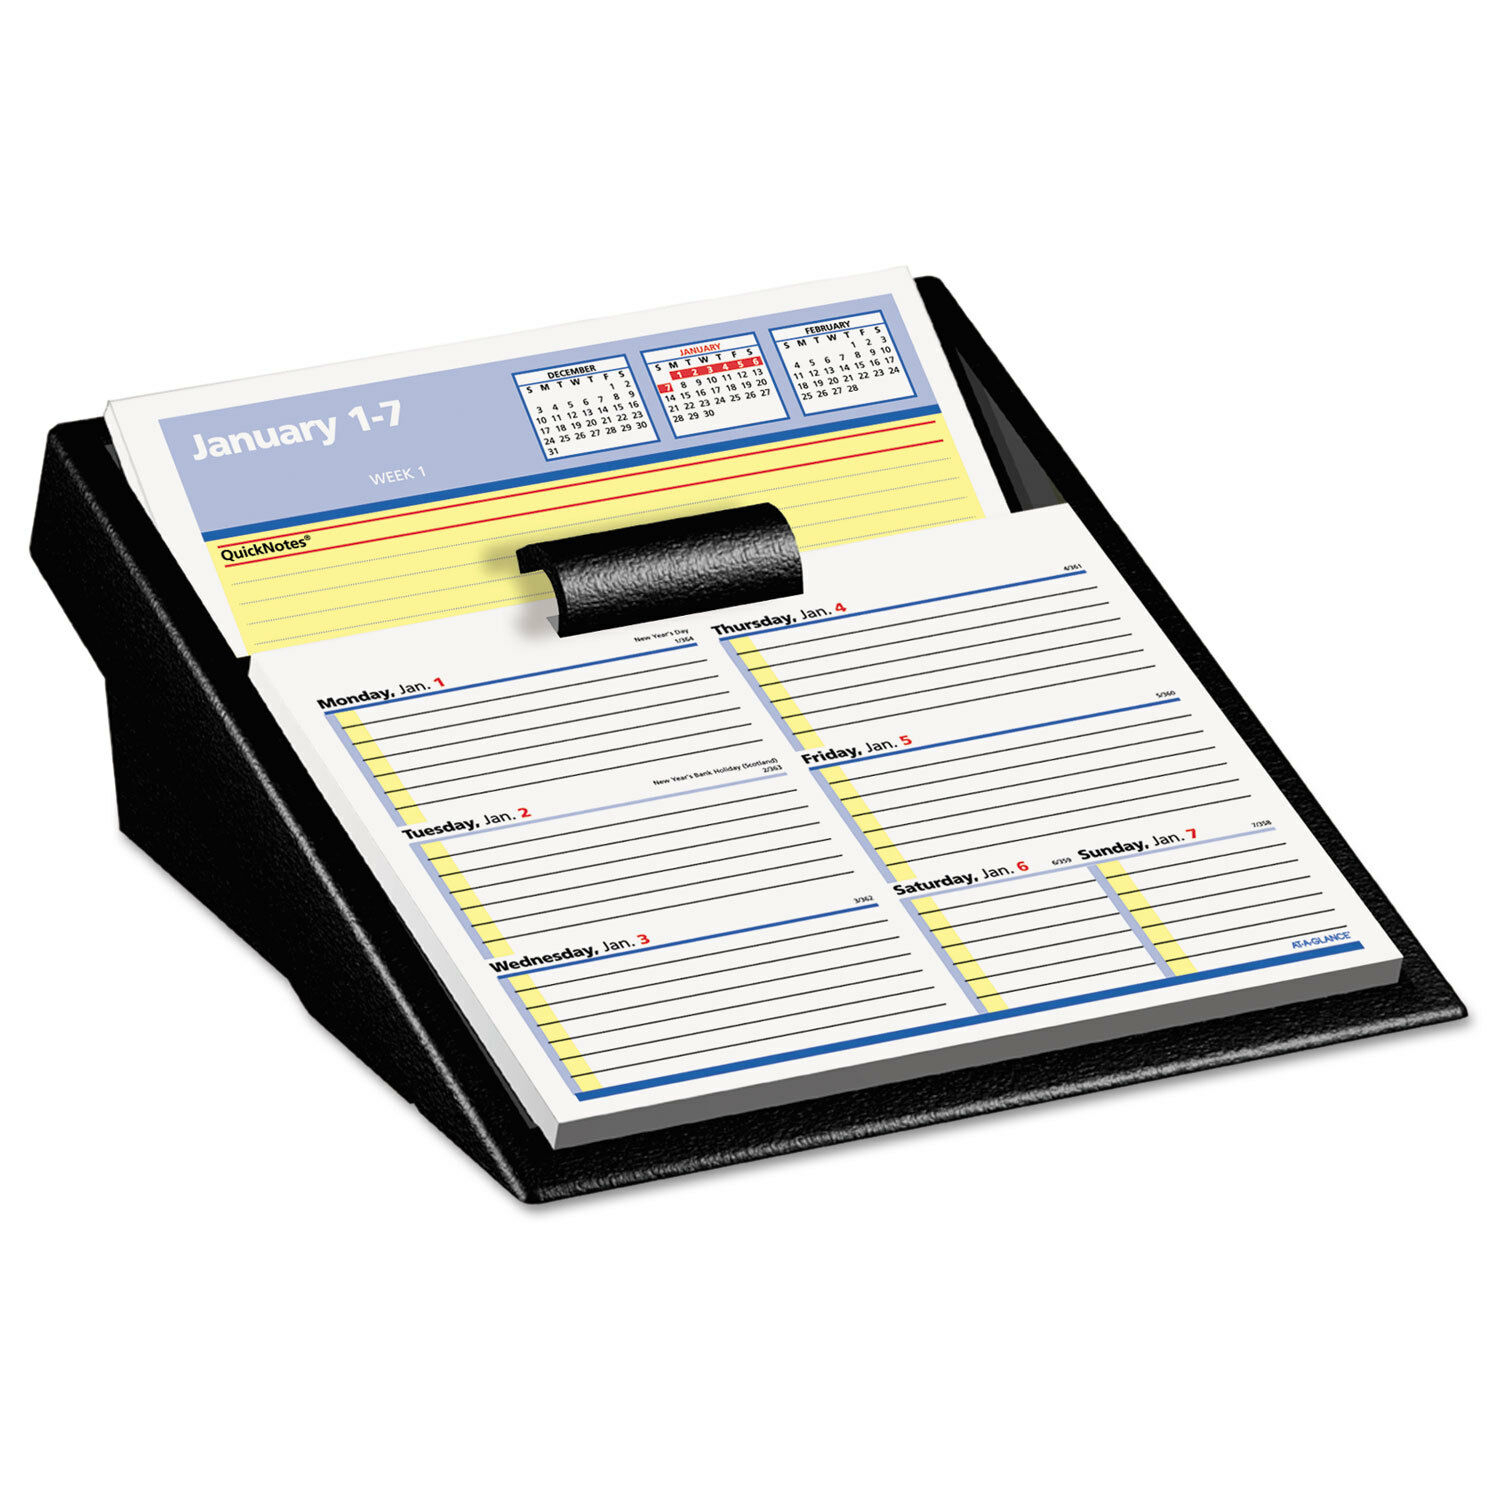 Ataglance Flipaweek Desk Calendar Refill With Quicknotes 5 58 X 7 White in At A Glance Calendar Holder